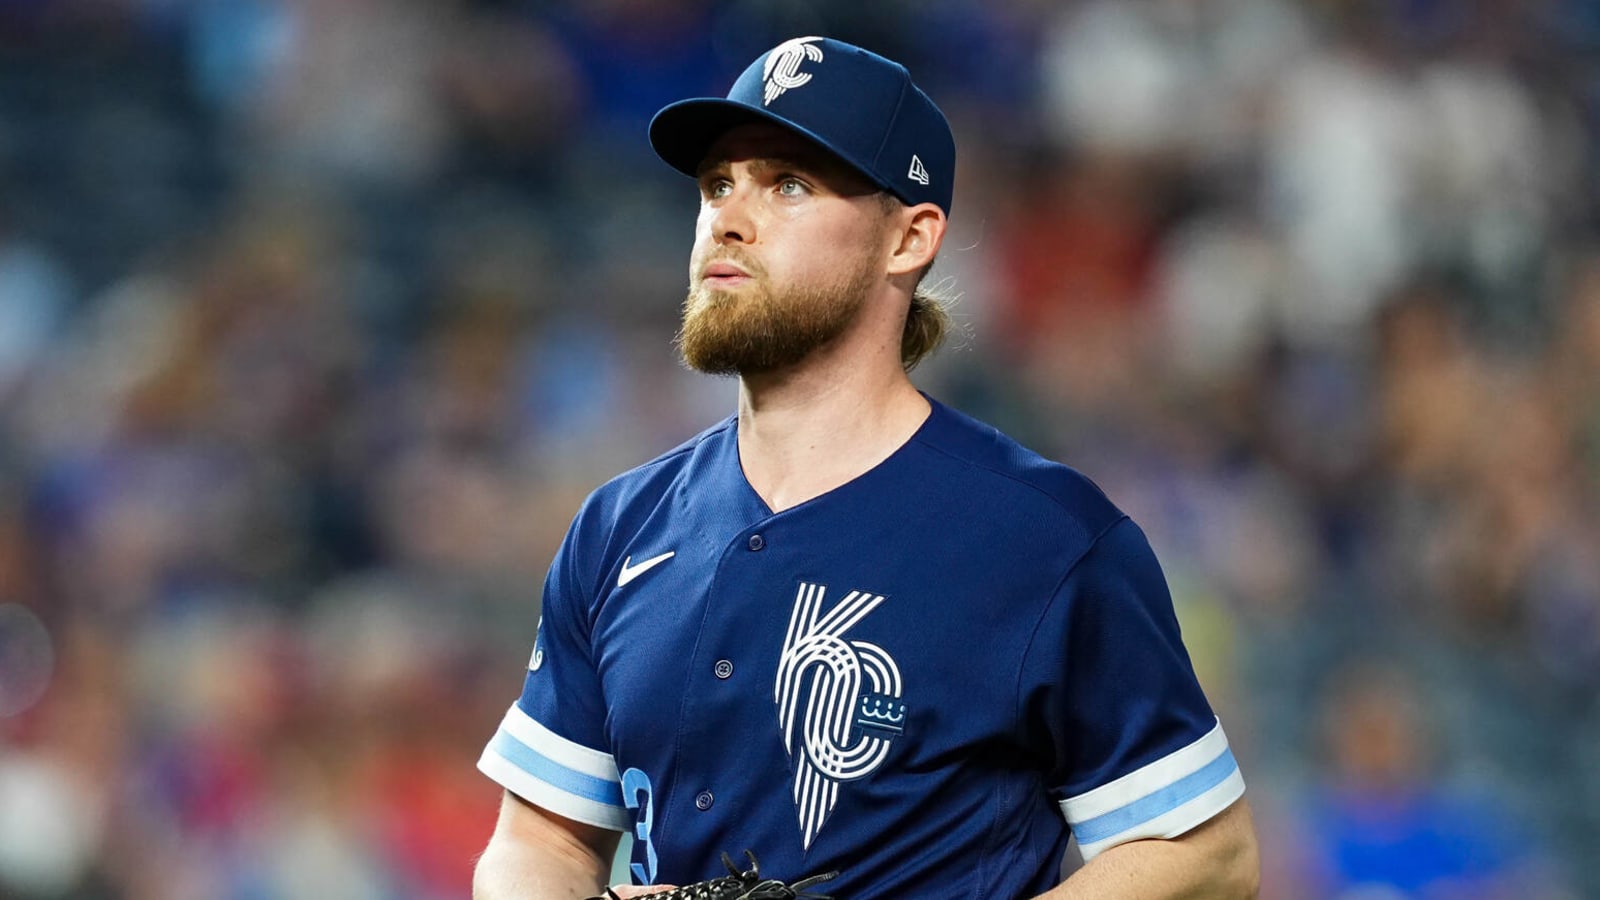 Royals transfer relief pitcher to 60-day IL